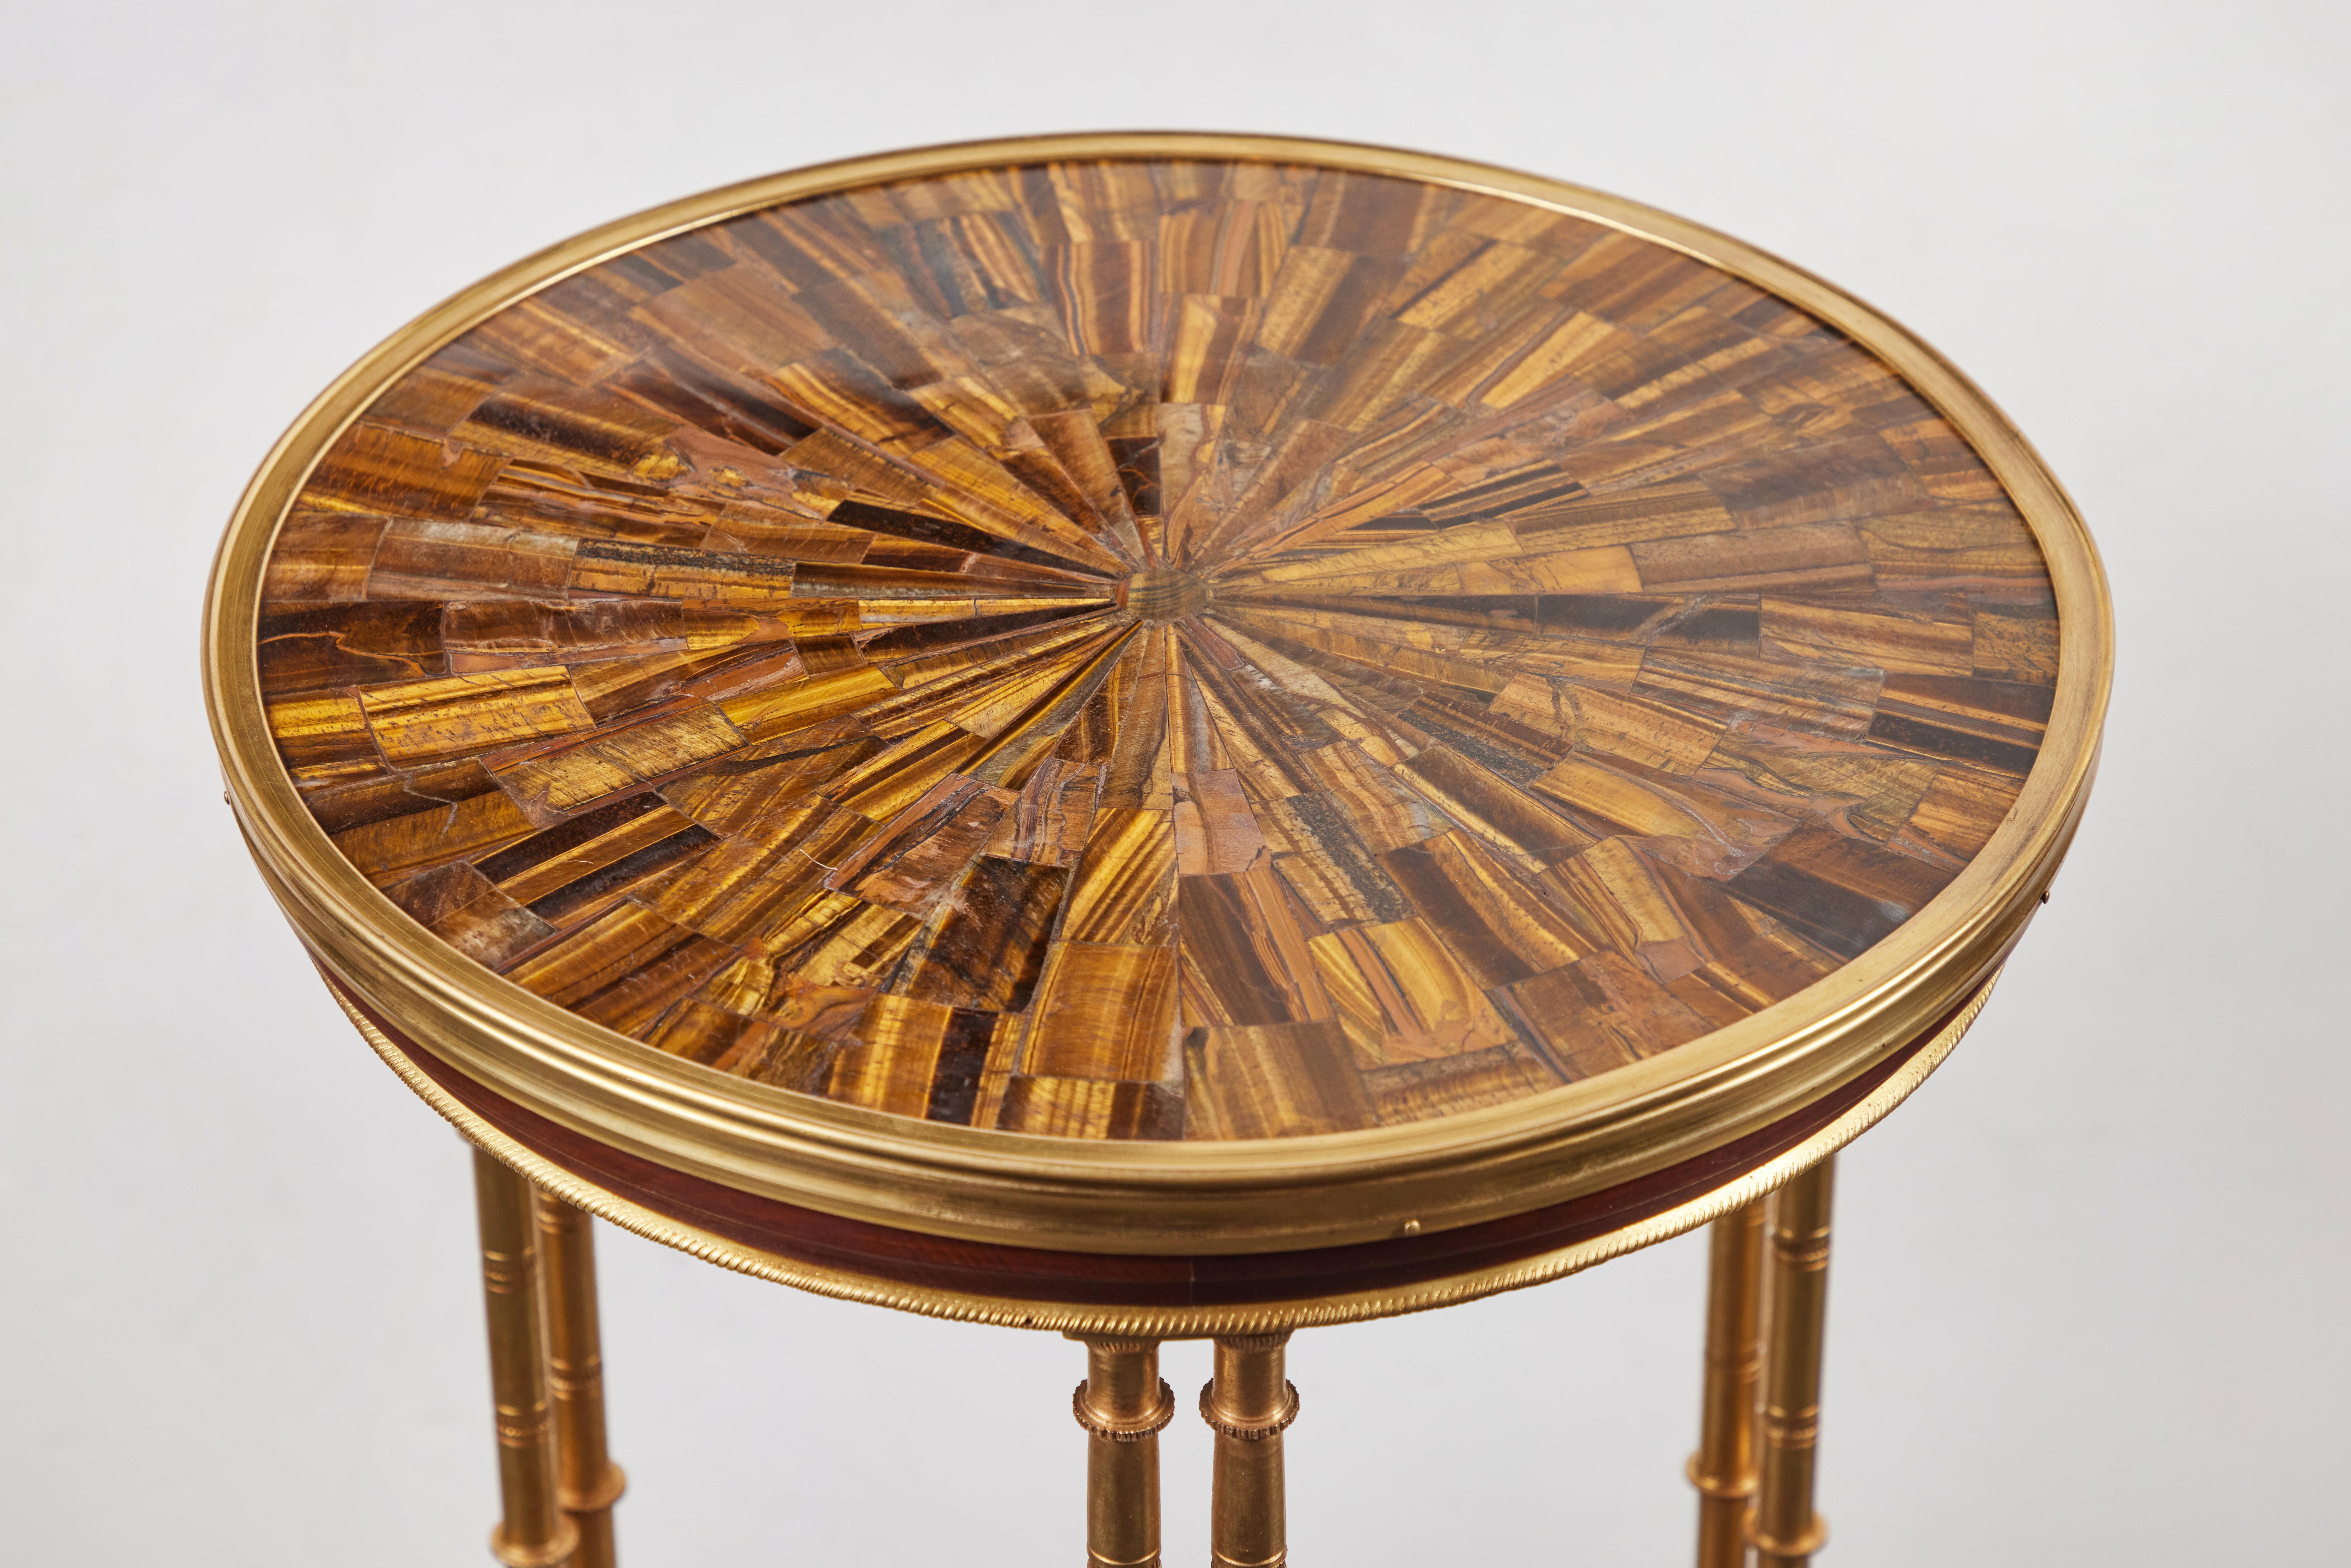 An elegant pair of veneered side tables with tiered pairs of gilt brass columns, and trim, and feet in the same. Each inlaid with luxurious, radiating, polished tigers eye gemstone tops.